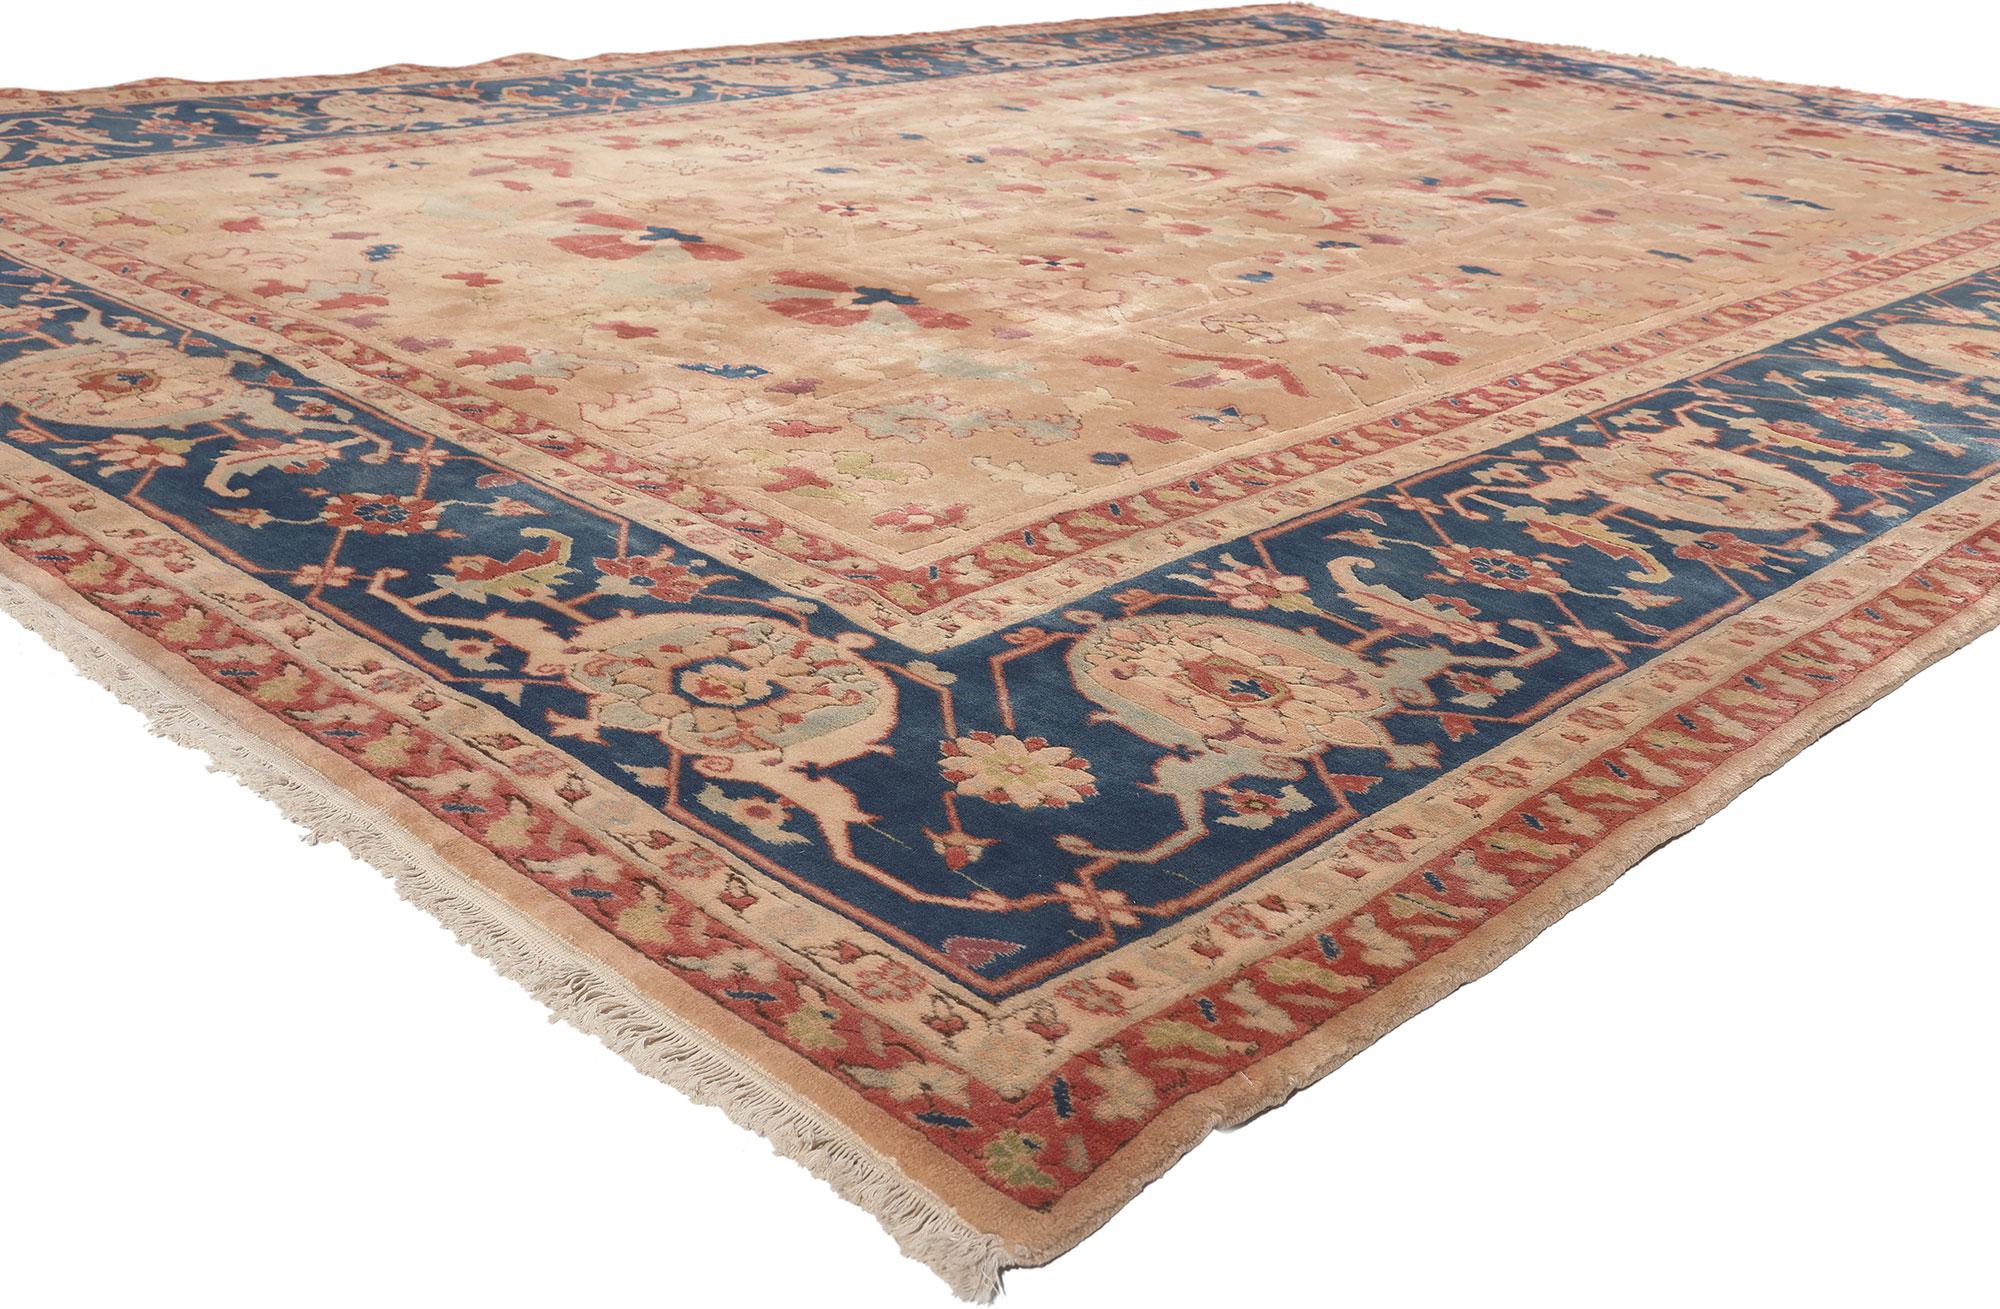 74185 Vintage Turkish Oushak Rug, 08'08 X 12'07. 
Anatolian charm meets traditional sensibility in this hand knotted wool vintage Turkish Oushak rug. The decorative tree of life design and sophisticated color palette woven into this piece work